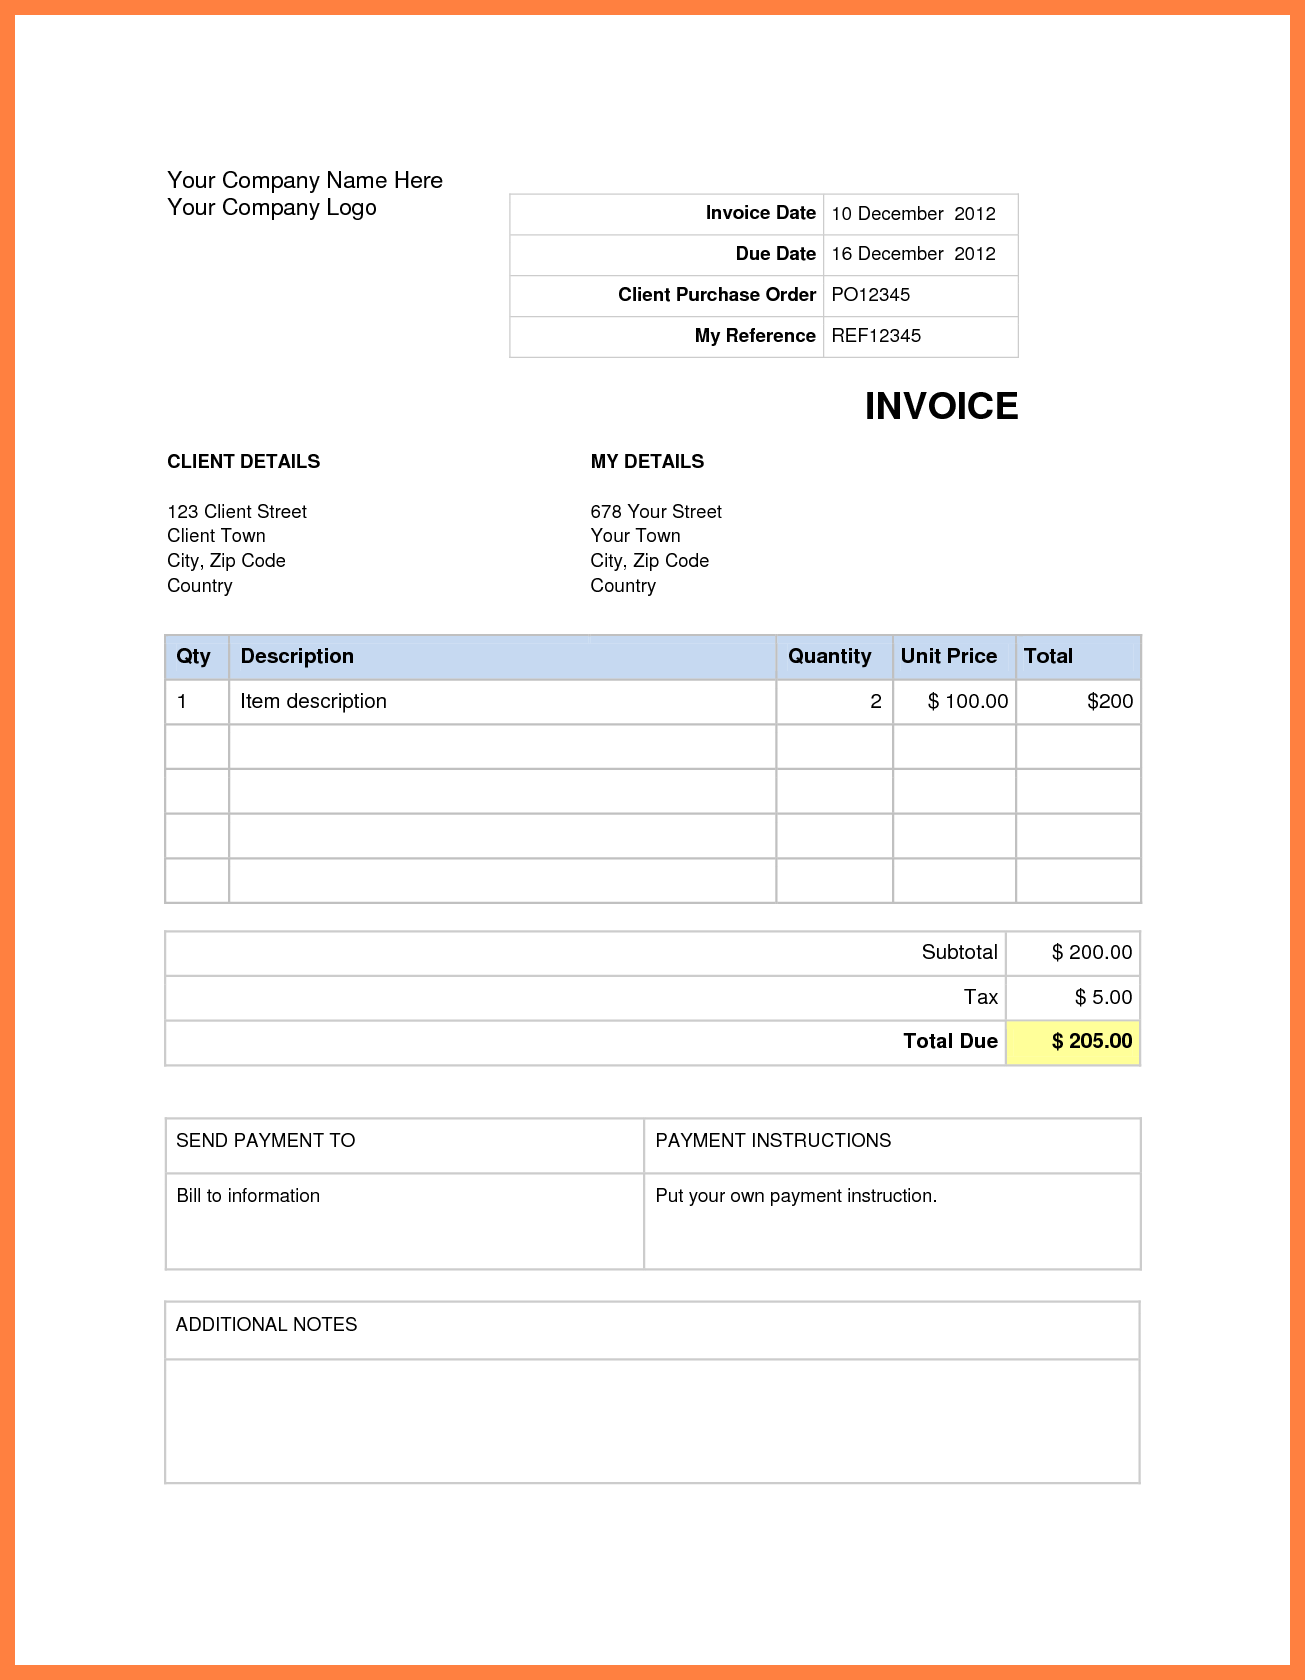 Microsoft word 2010 invoice template Db excel